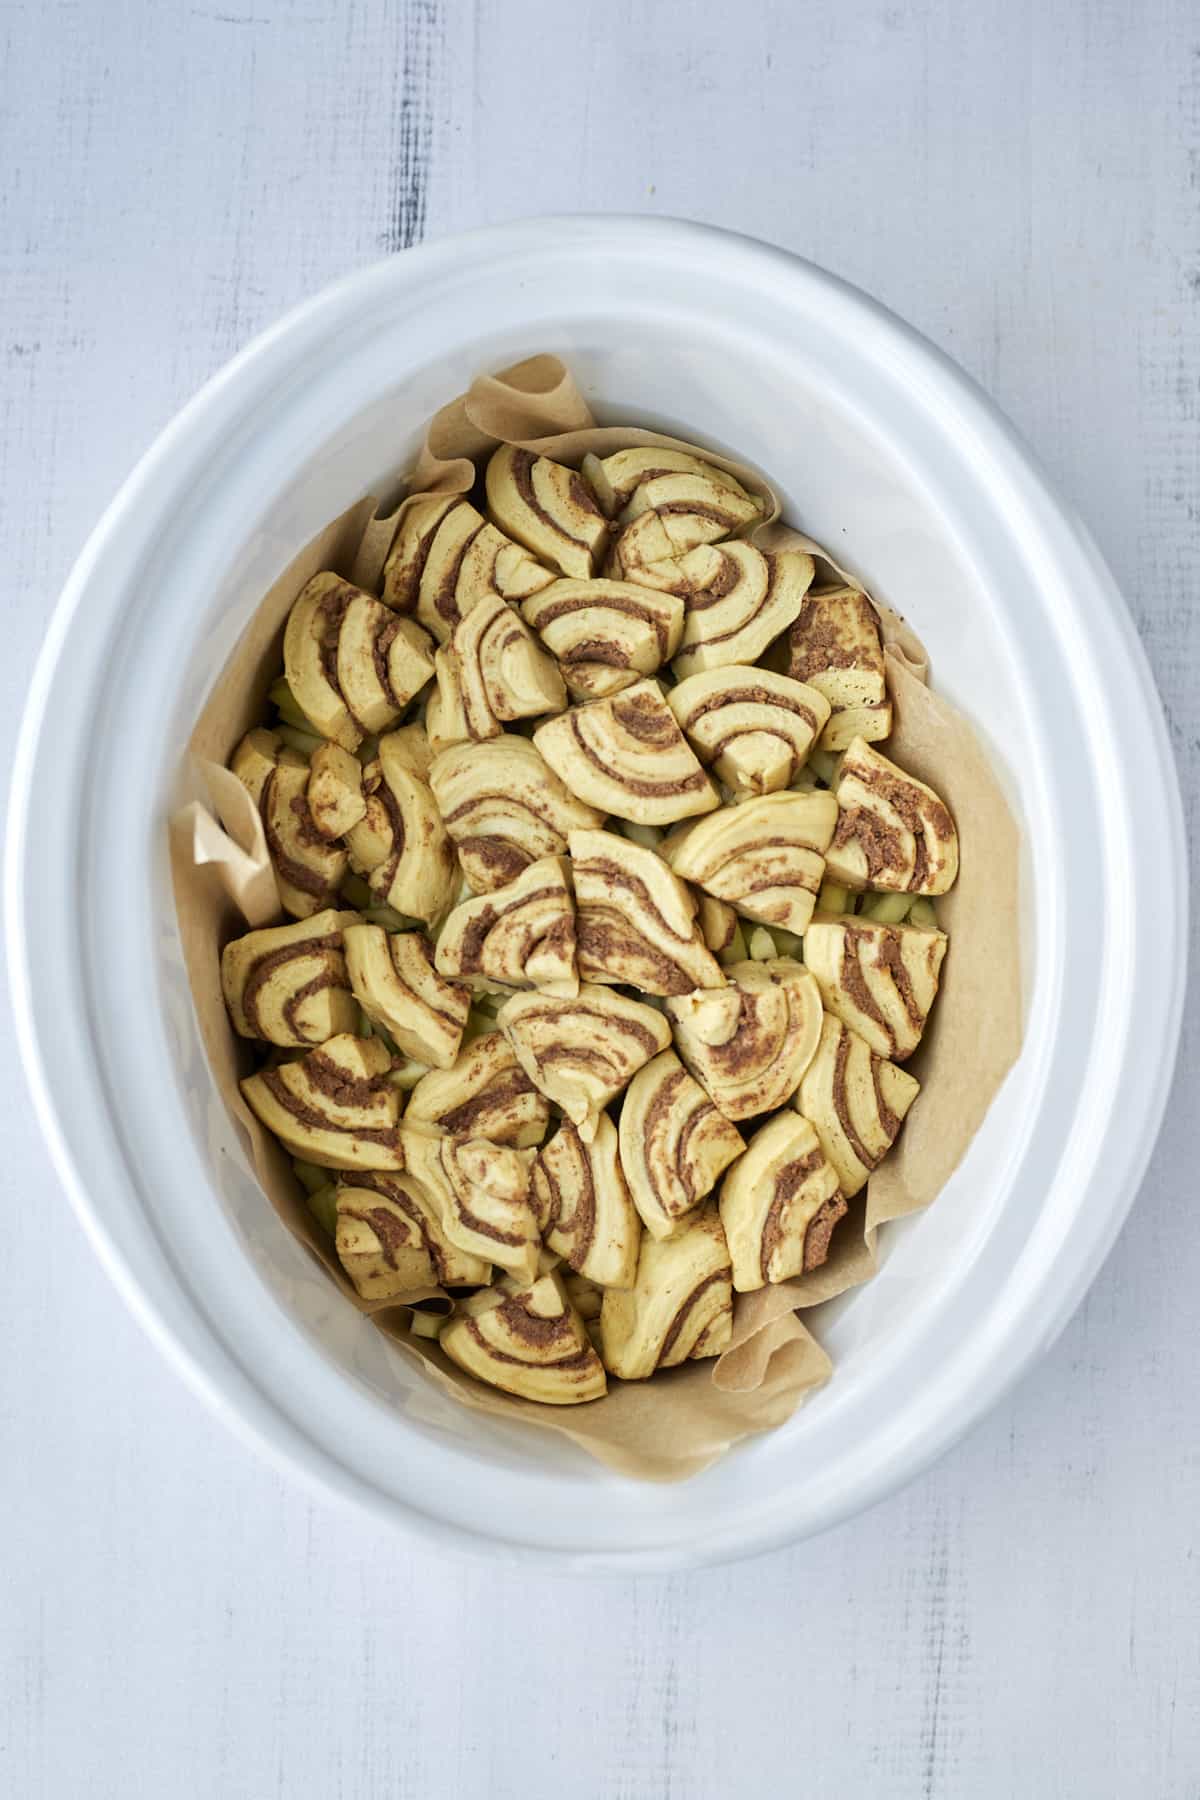 a slow cooker full of unbaked cinnamon roll pieces and apples.